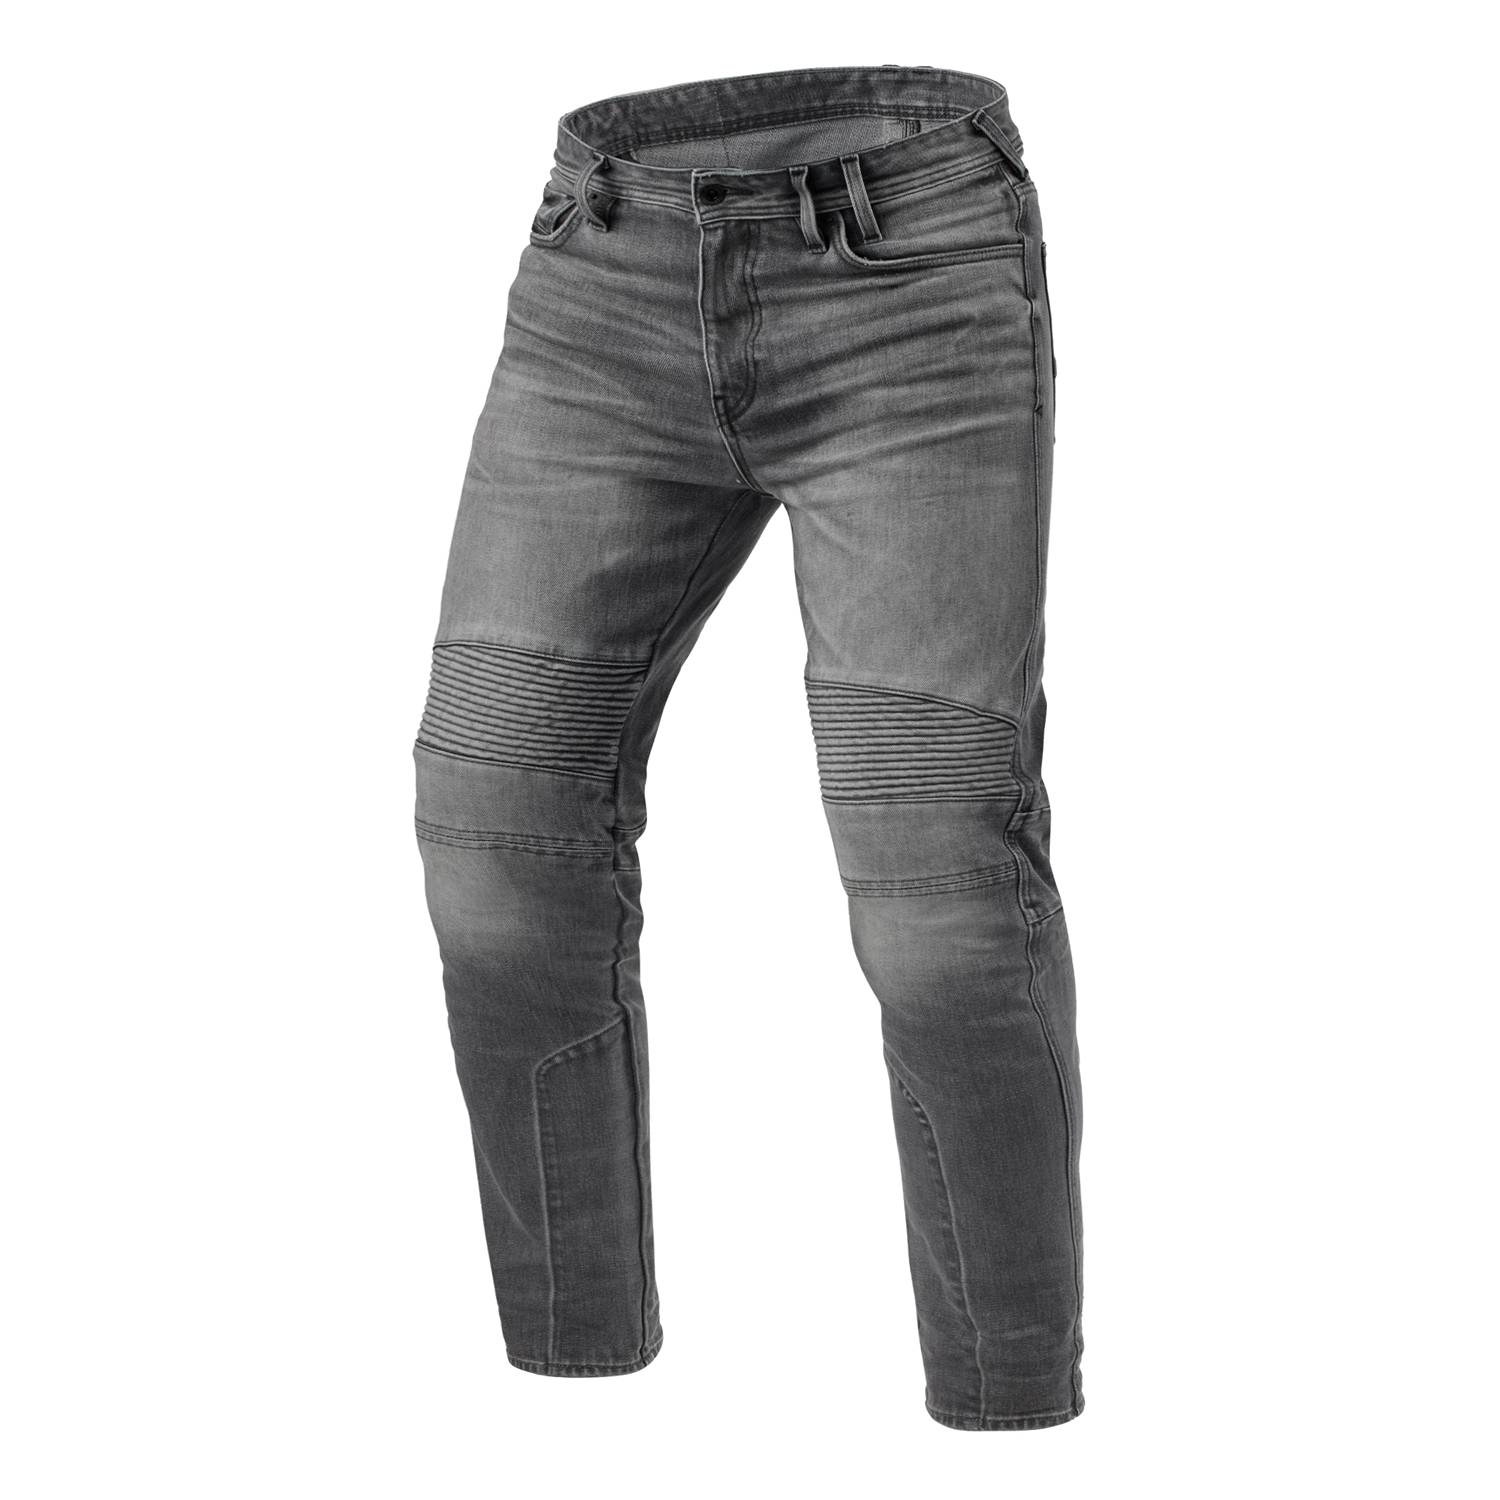 Image of REV'IT! Jeans Moto 2 TF Medium Grey Used L34 Motorcycle Jeans Size L34/W30 ID 8700001375504